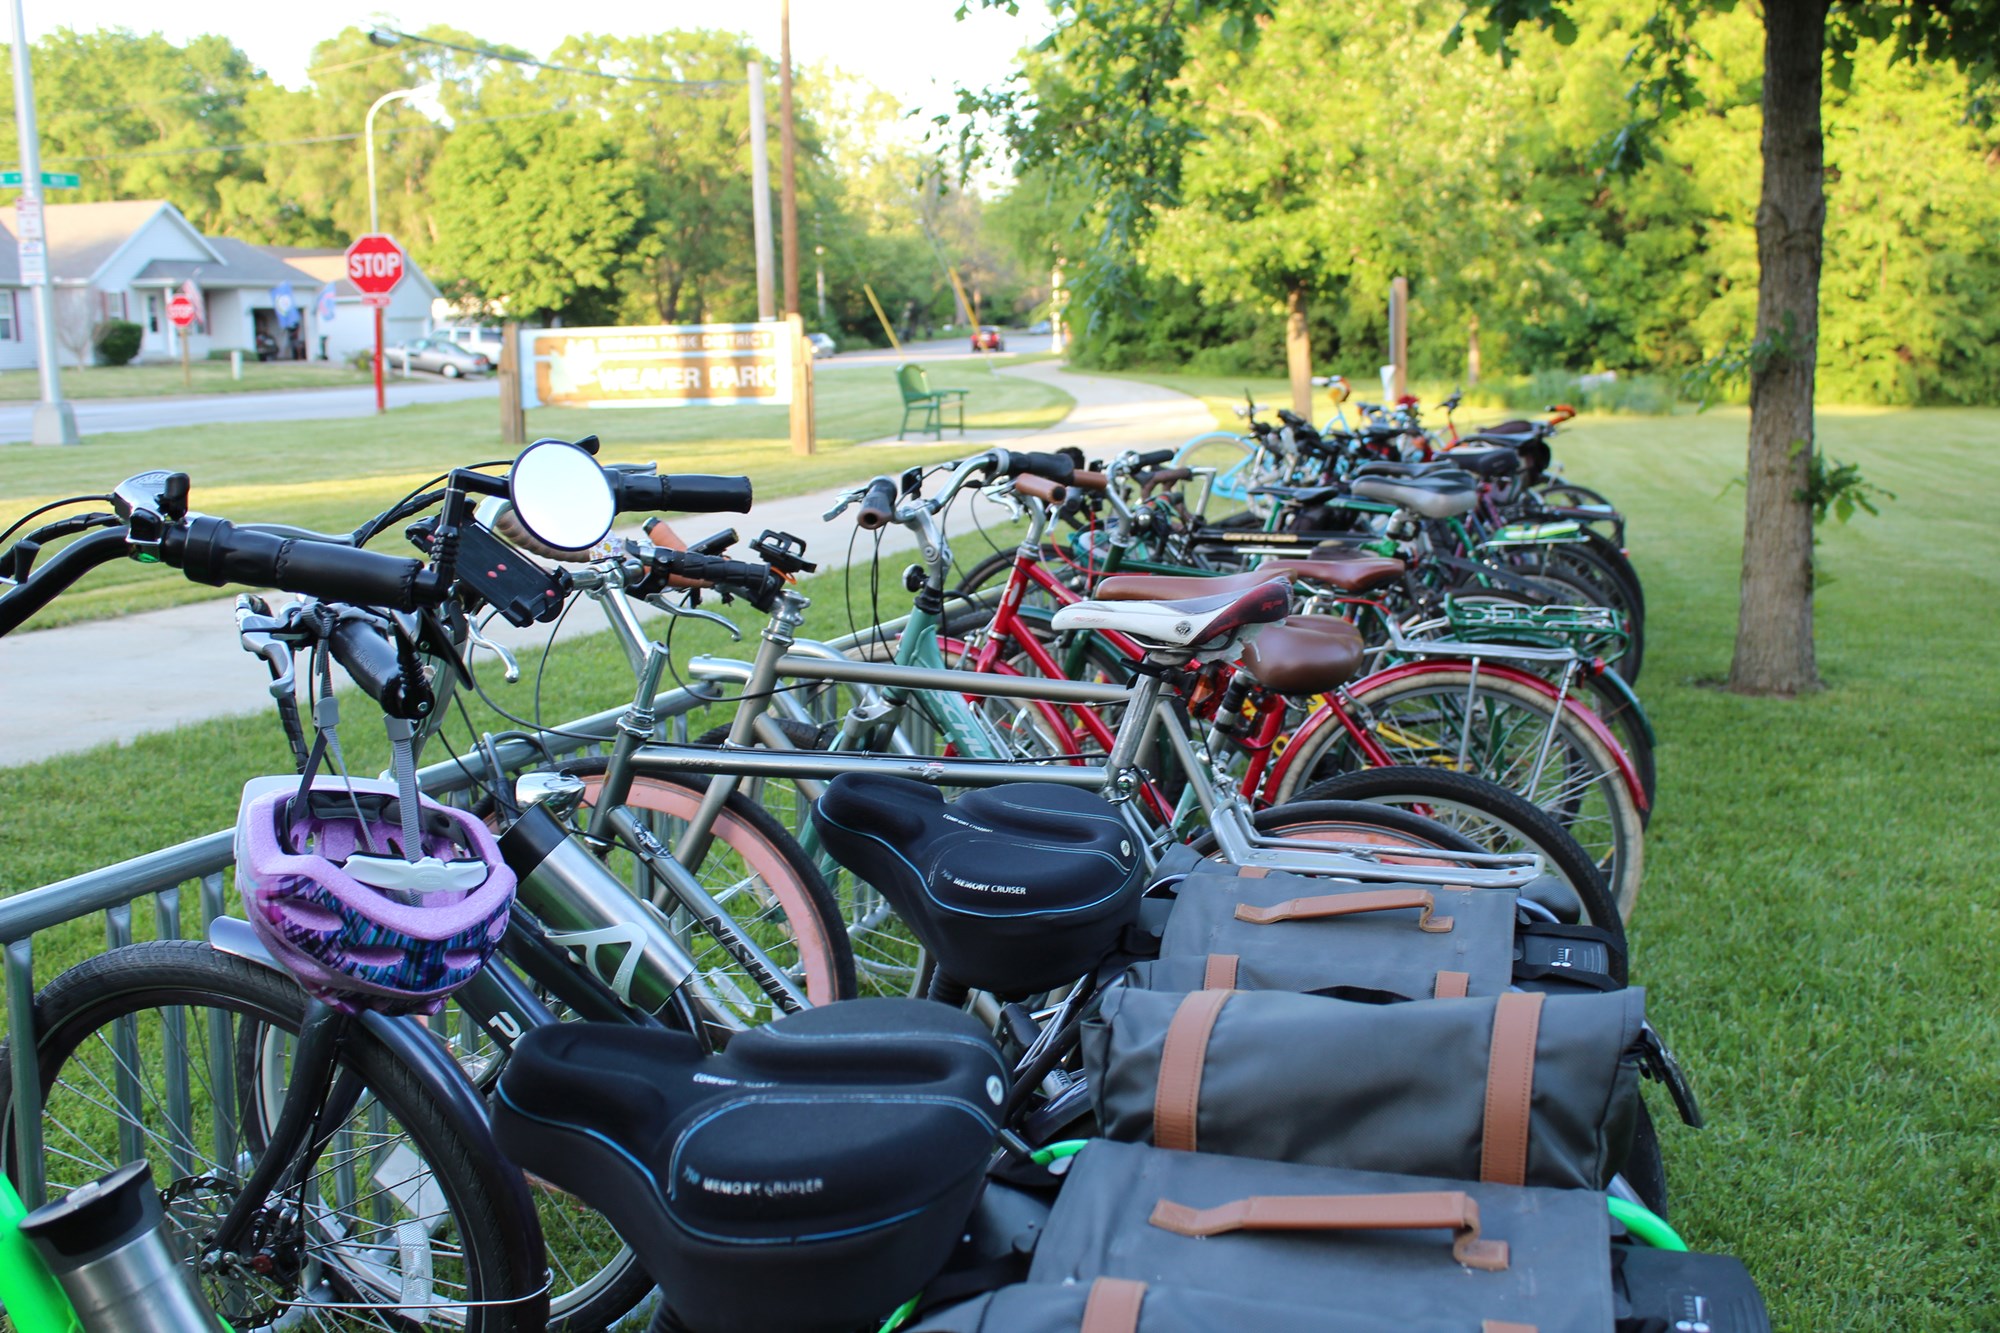 Share a bike ride with the community under the full moon